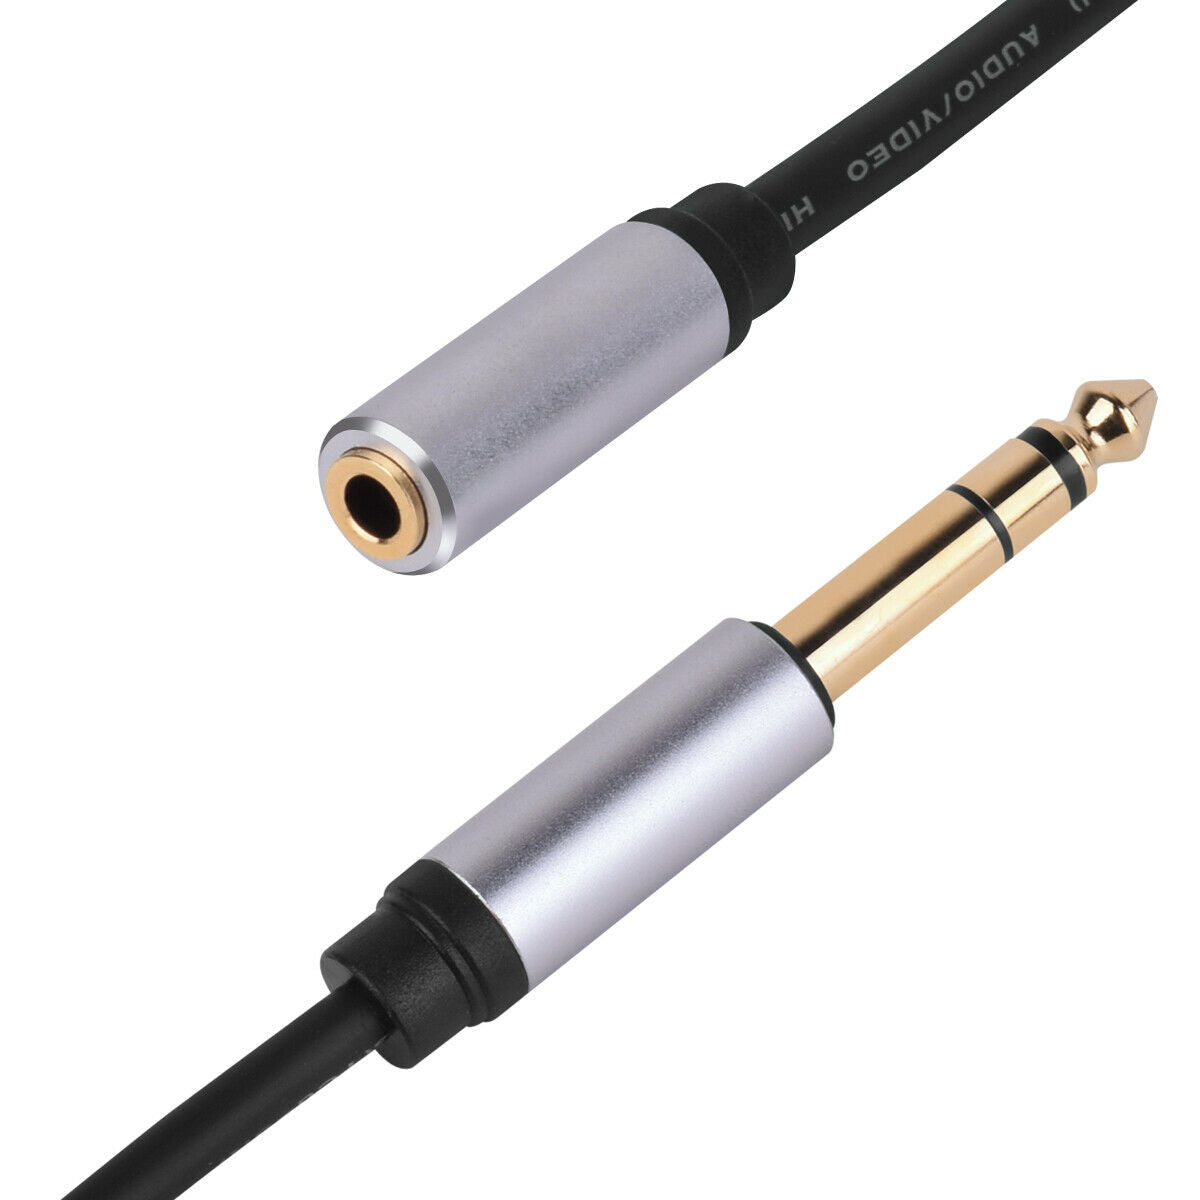 6.35mm 1/4 Male to 3.5mm Female Jack TRS Headphone Audio Cable 0.25m